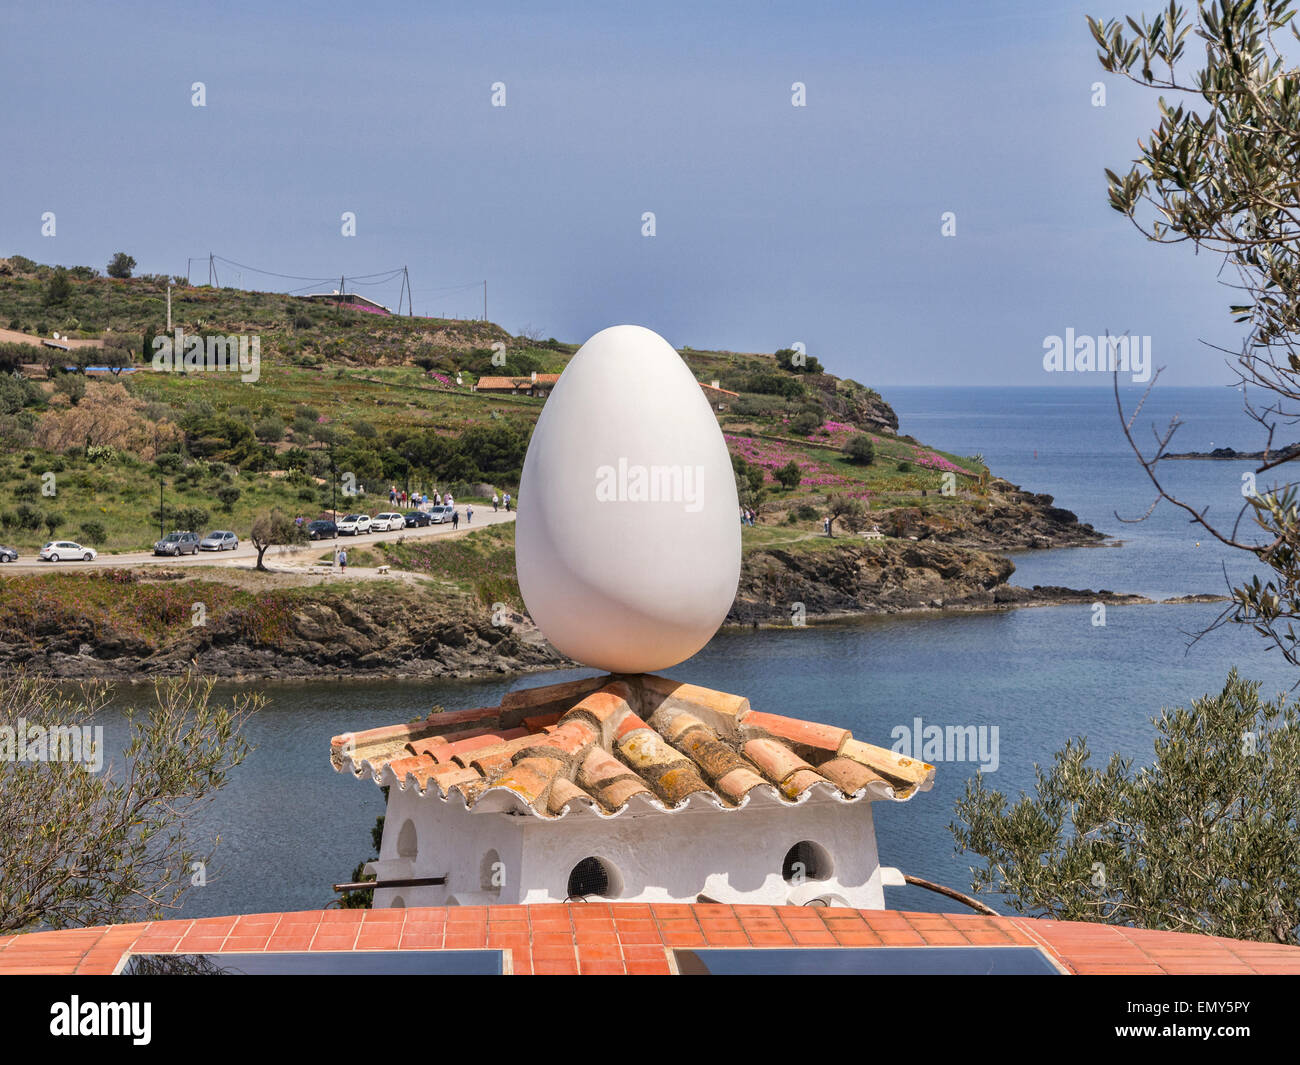 Salvador Dali sculpture of an egg on top of a dovecote, Port Lligat, Catalonia, Spain. Stock Photo